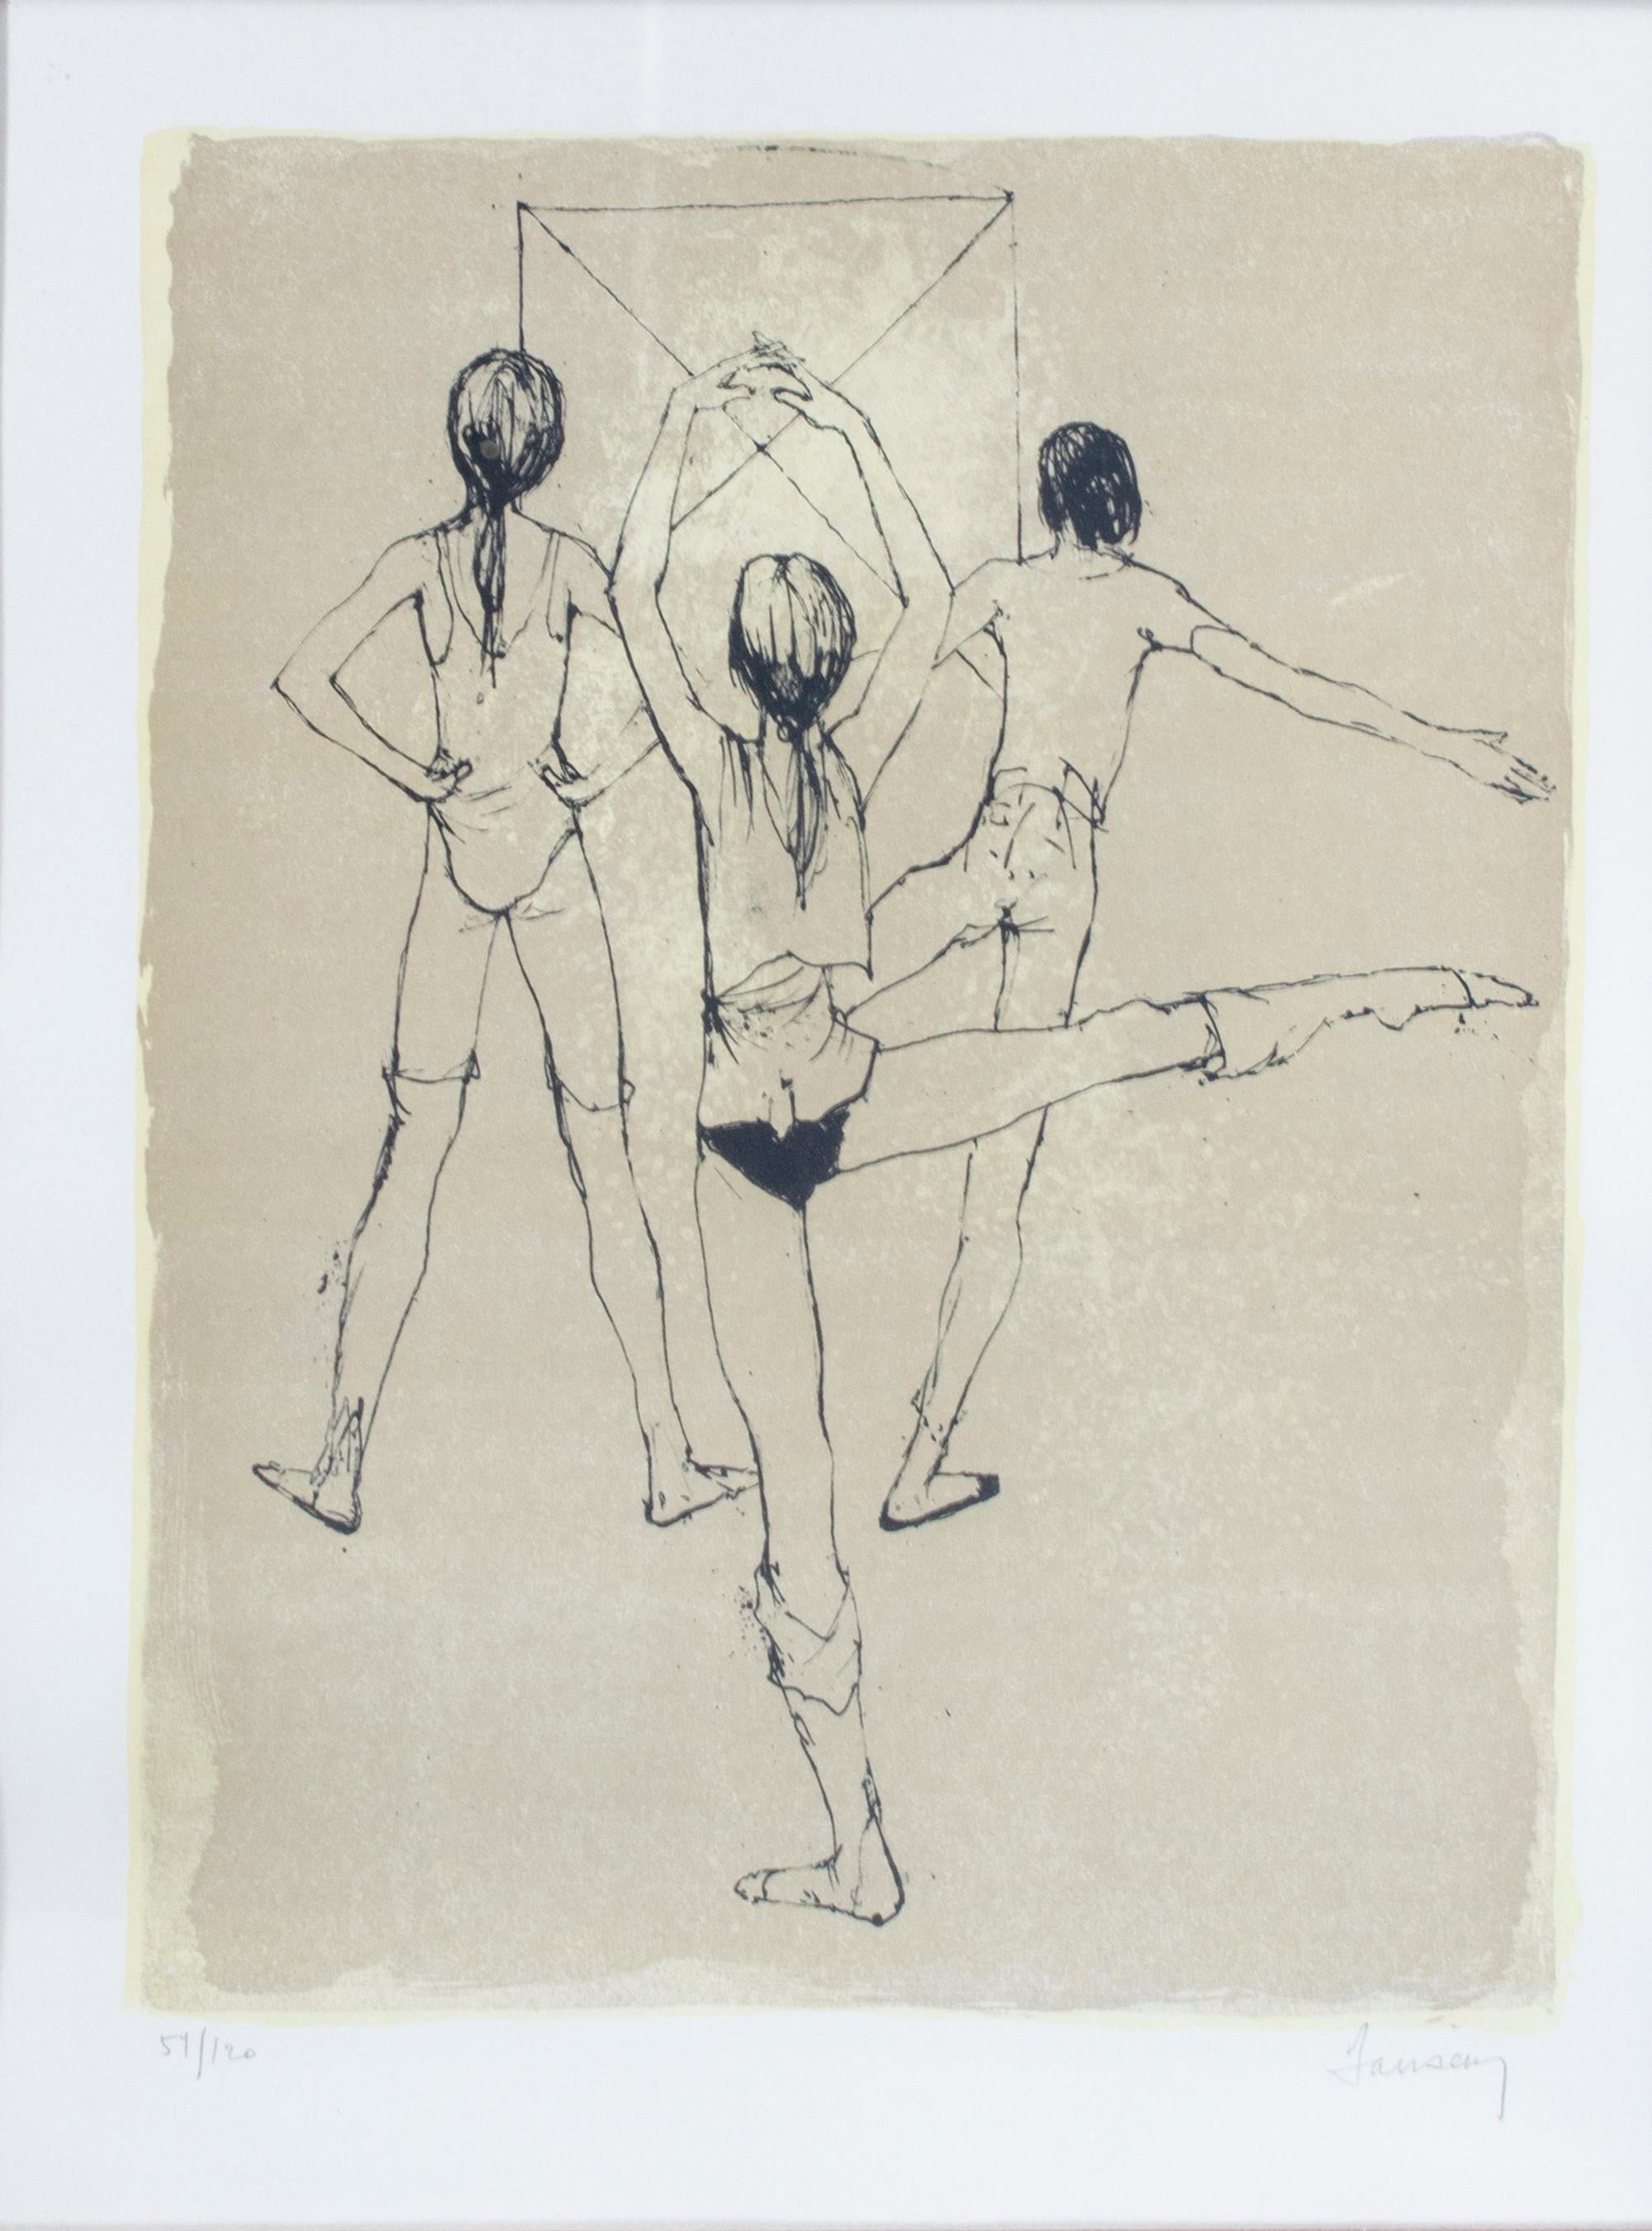 "La Danse" is a print signed by Jean Jansem. Three ballerinas face away from the viewer and are in different positions. One is in the back closest to the viewer, her hands are held high and her right leg is extended to the right. In front of her to